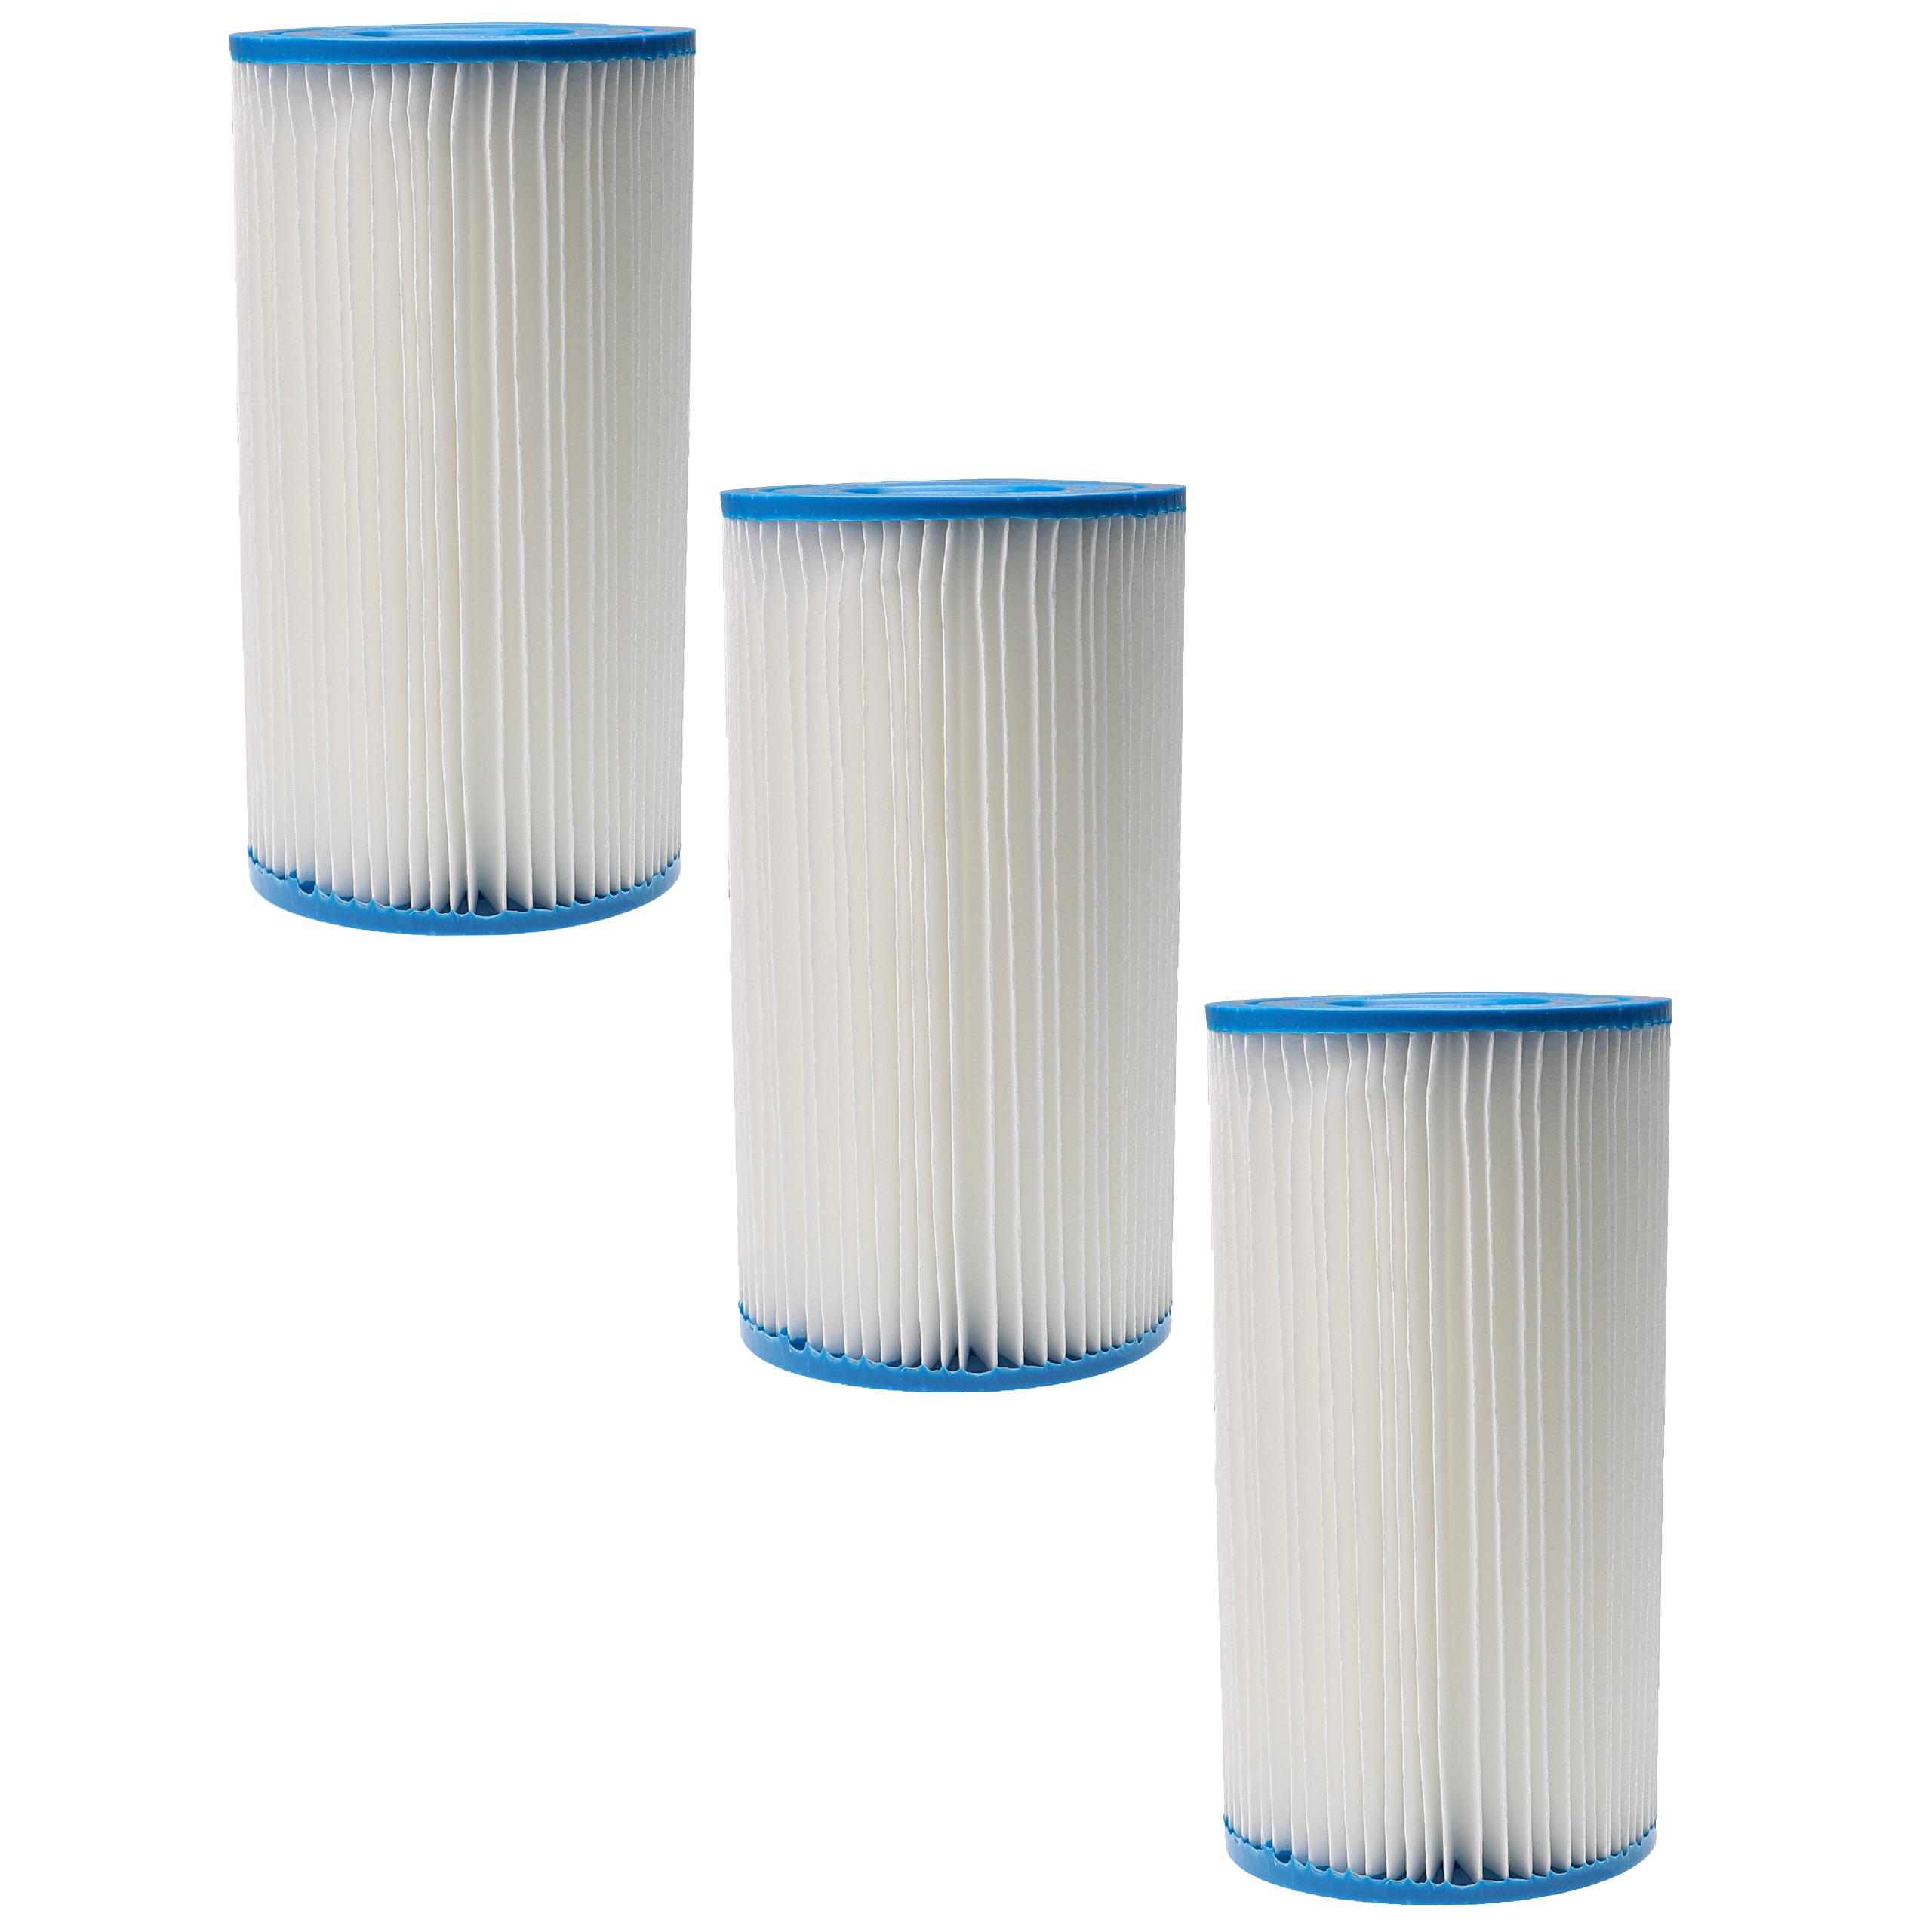 3x Water Filter replaces Intex filter type A for Intex Swimming Pool & Pump - Filter Cartridge